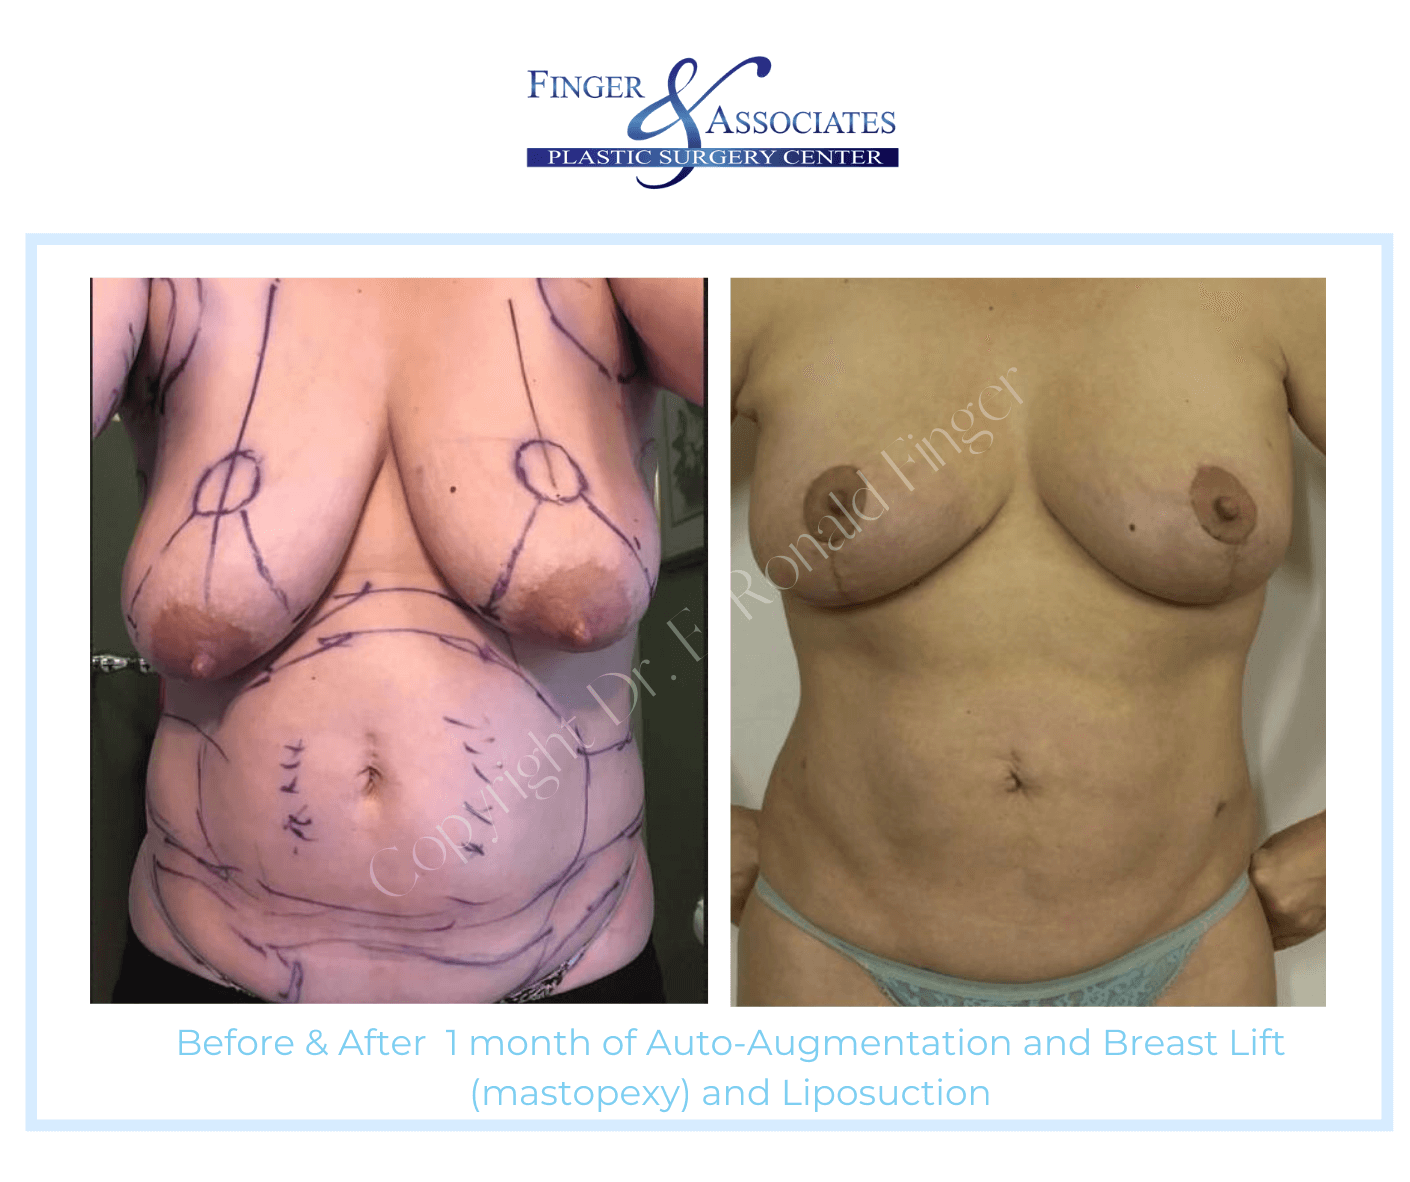 BEFORE AND AFTER 1-MONTH AUTO-AUGMENTATION AND LIPOSUCTION